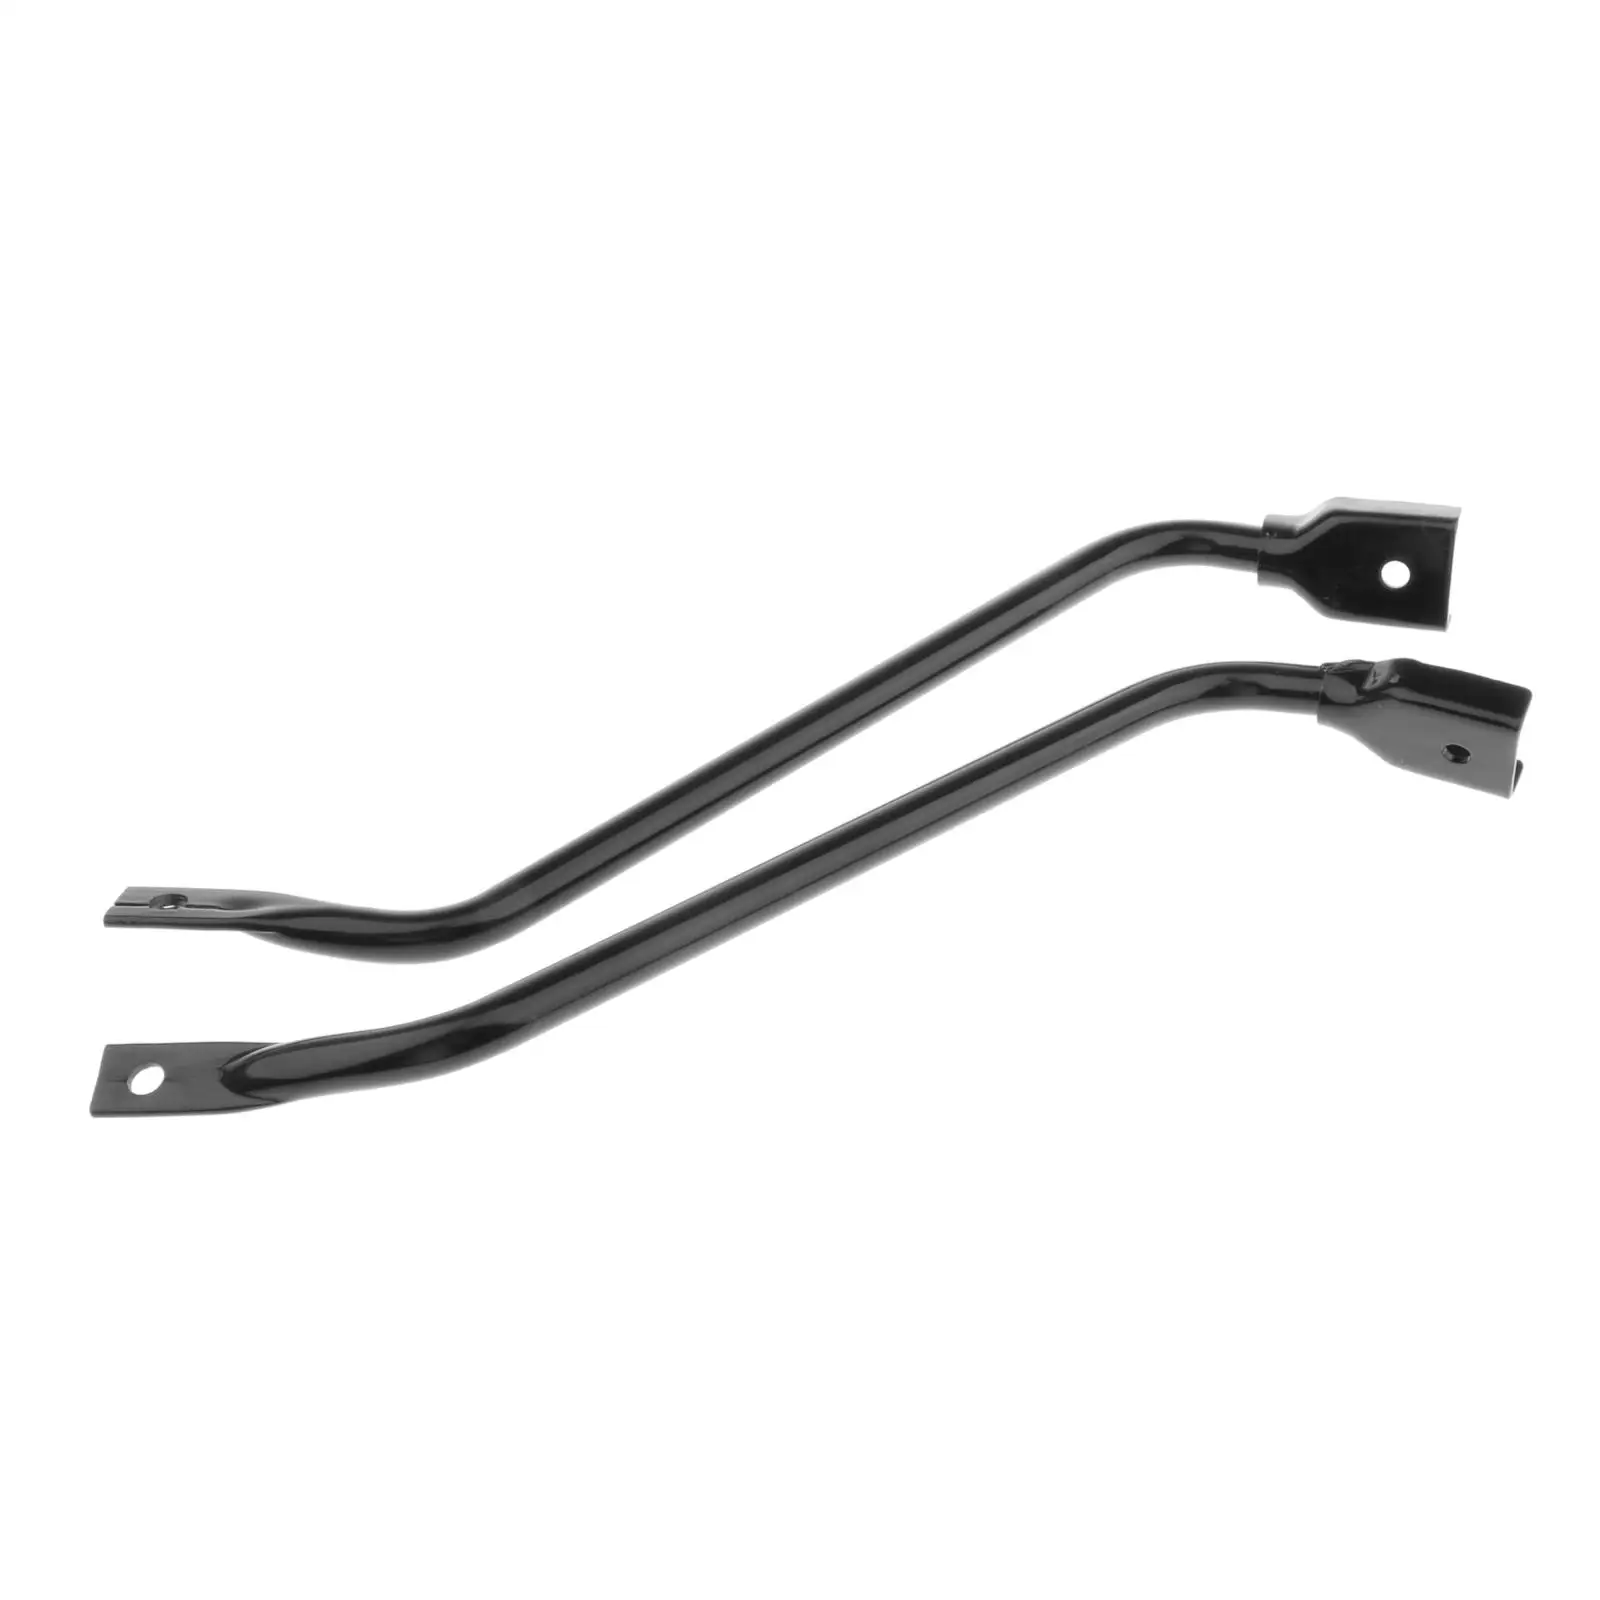 Front  Brackets Replaces fits for Banshee YFZ350